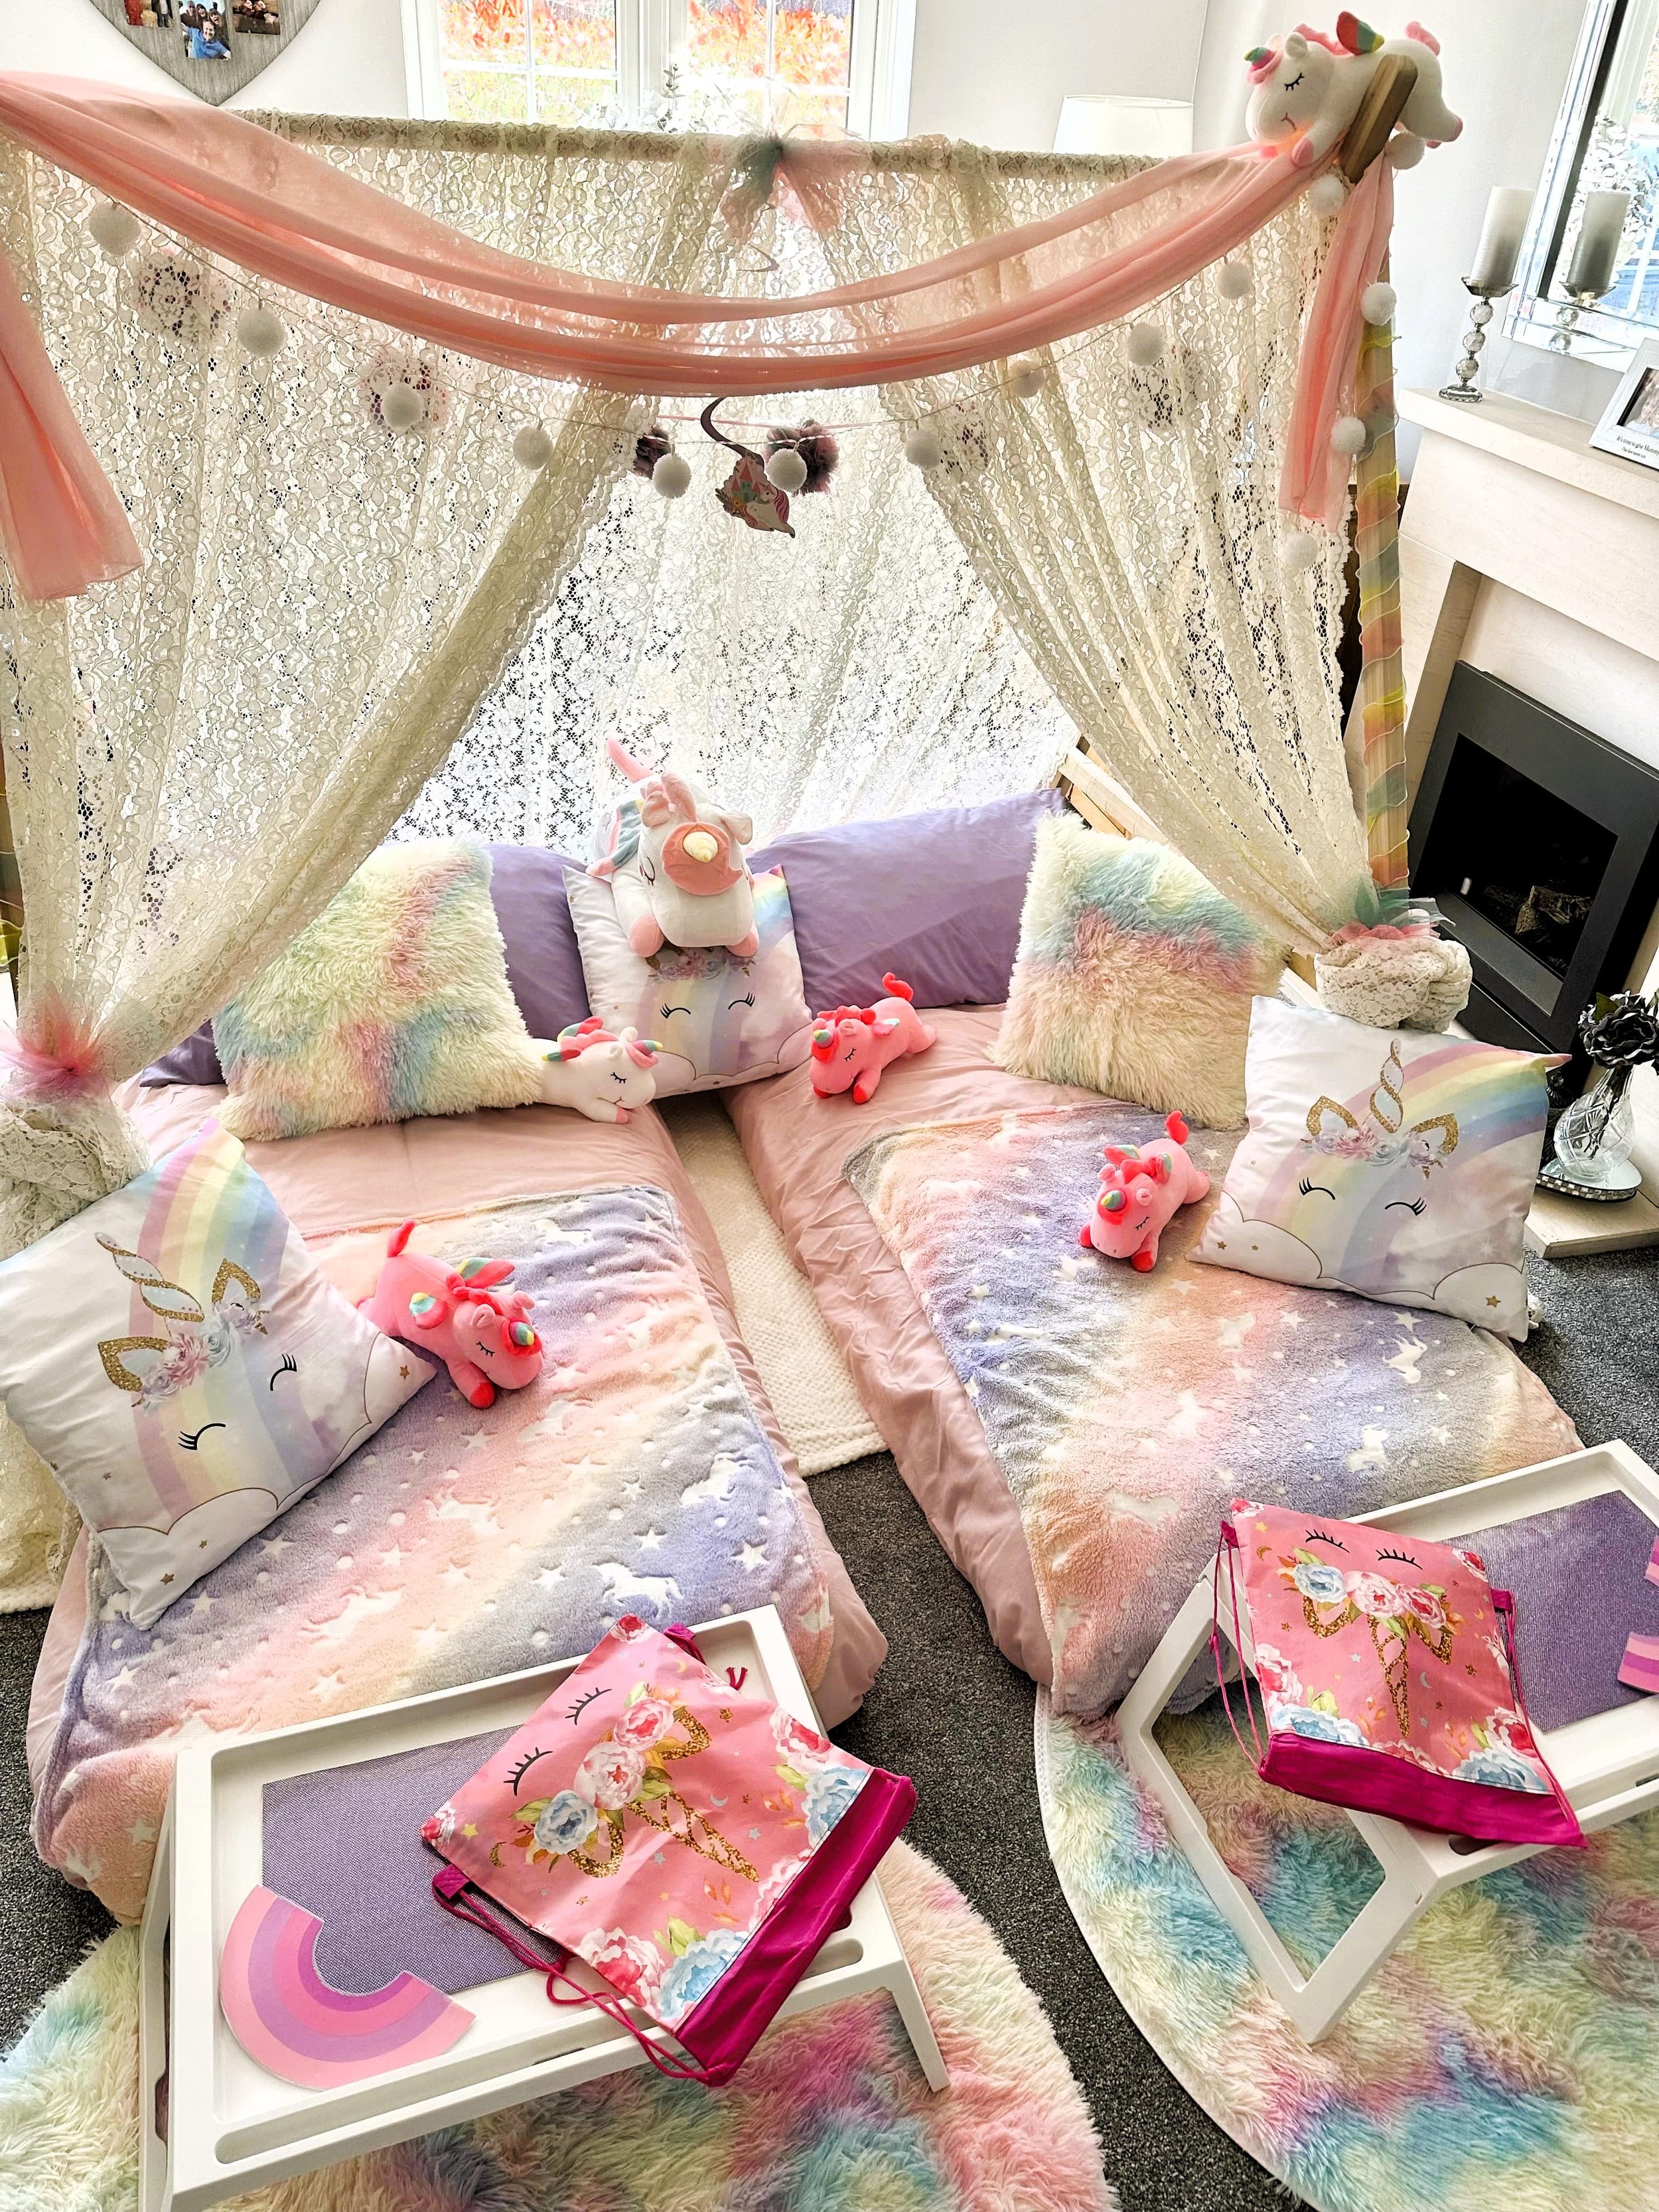 Special Occasions Kent - Sleepover Party Tents in East Sussex